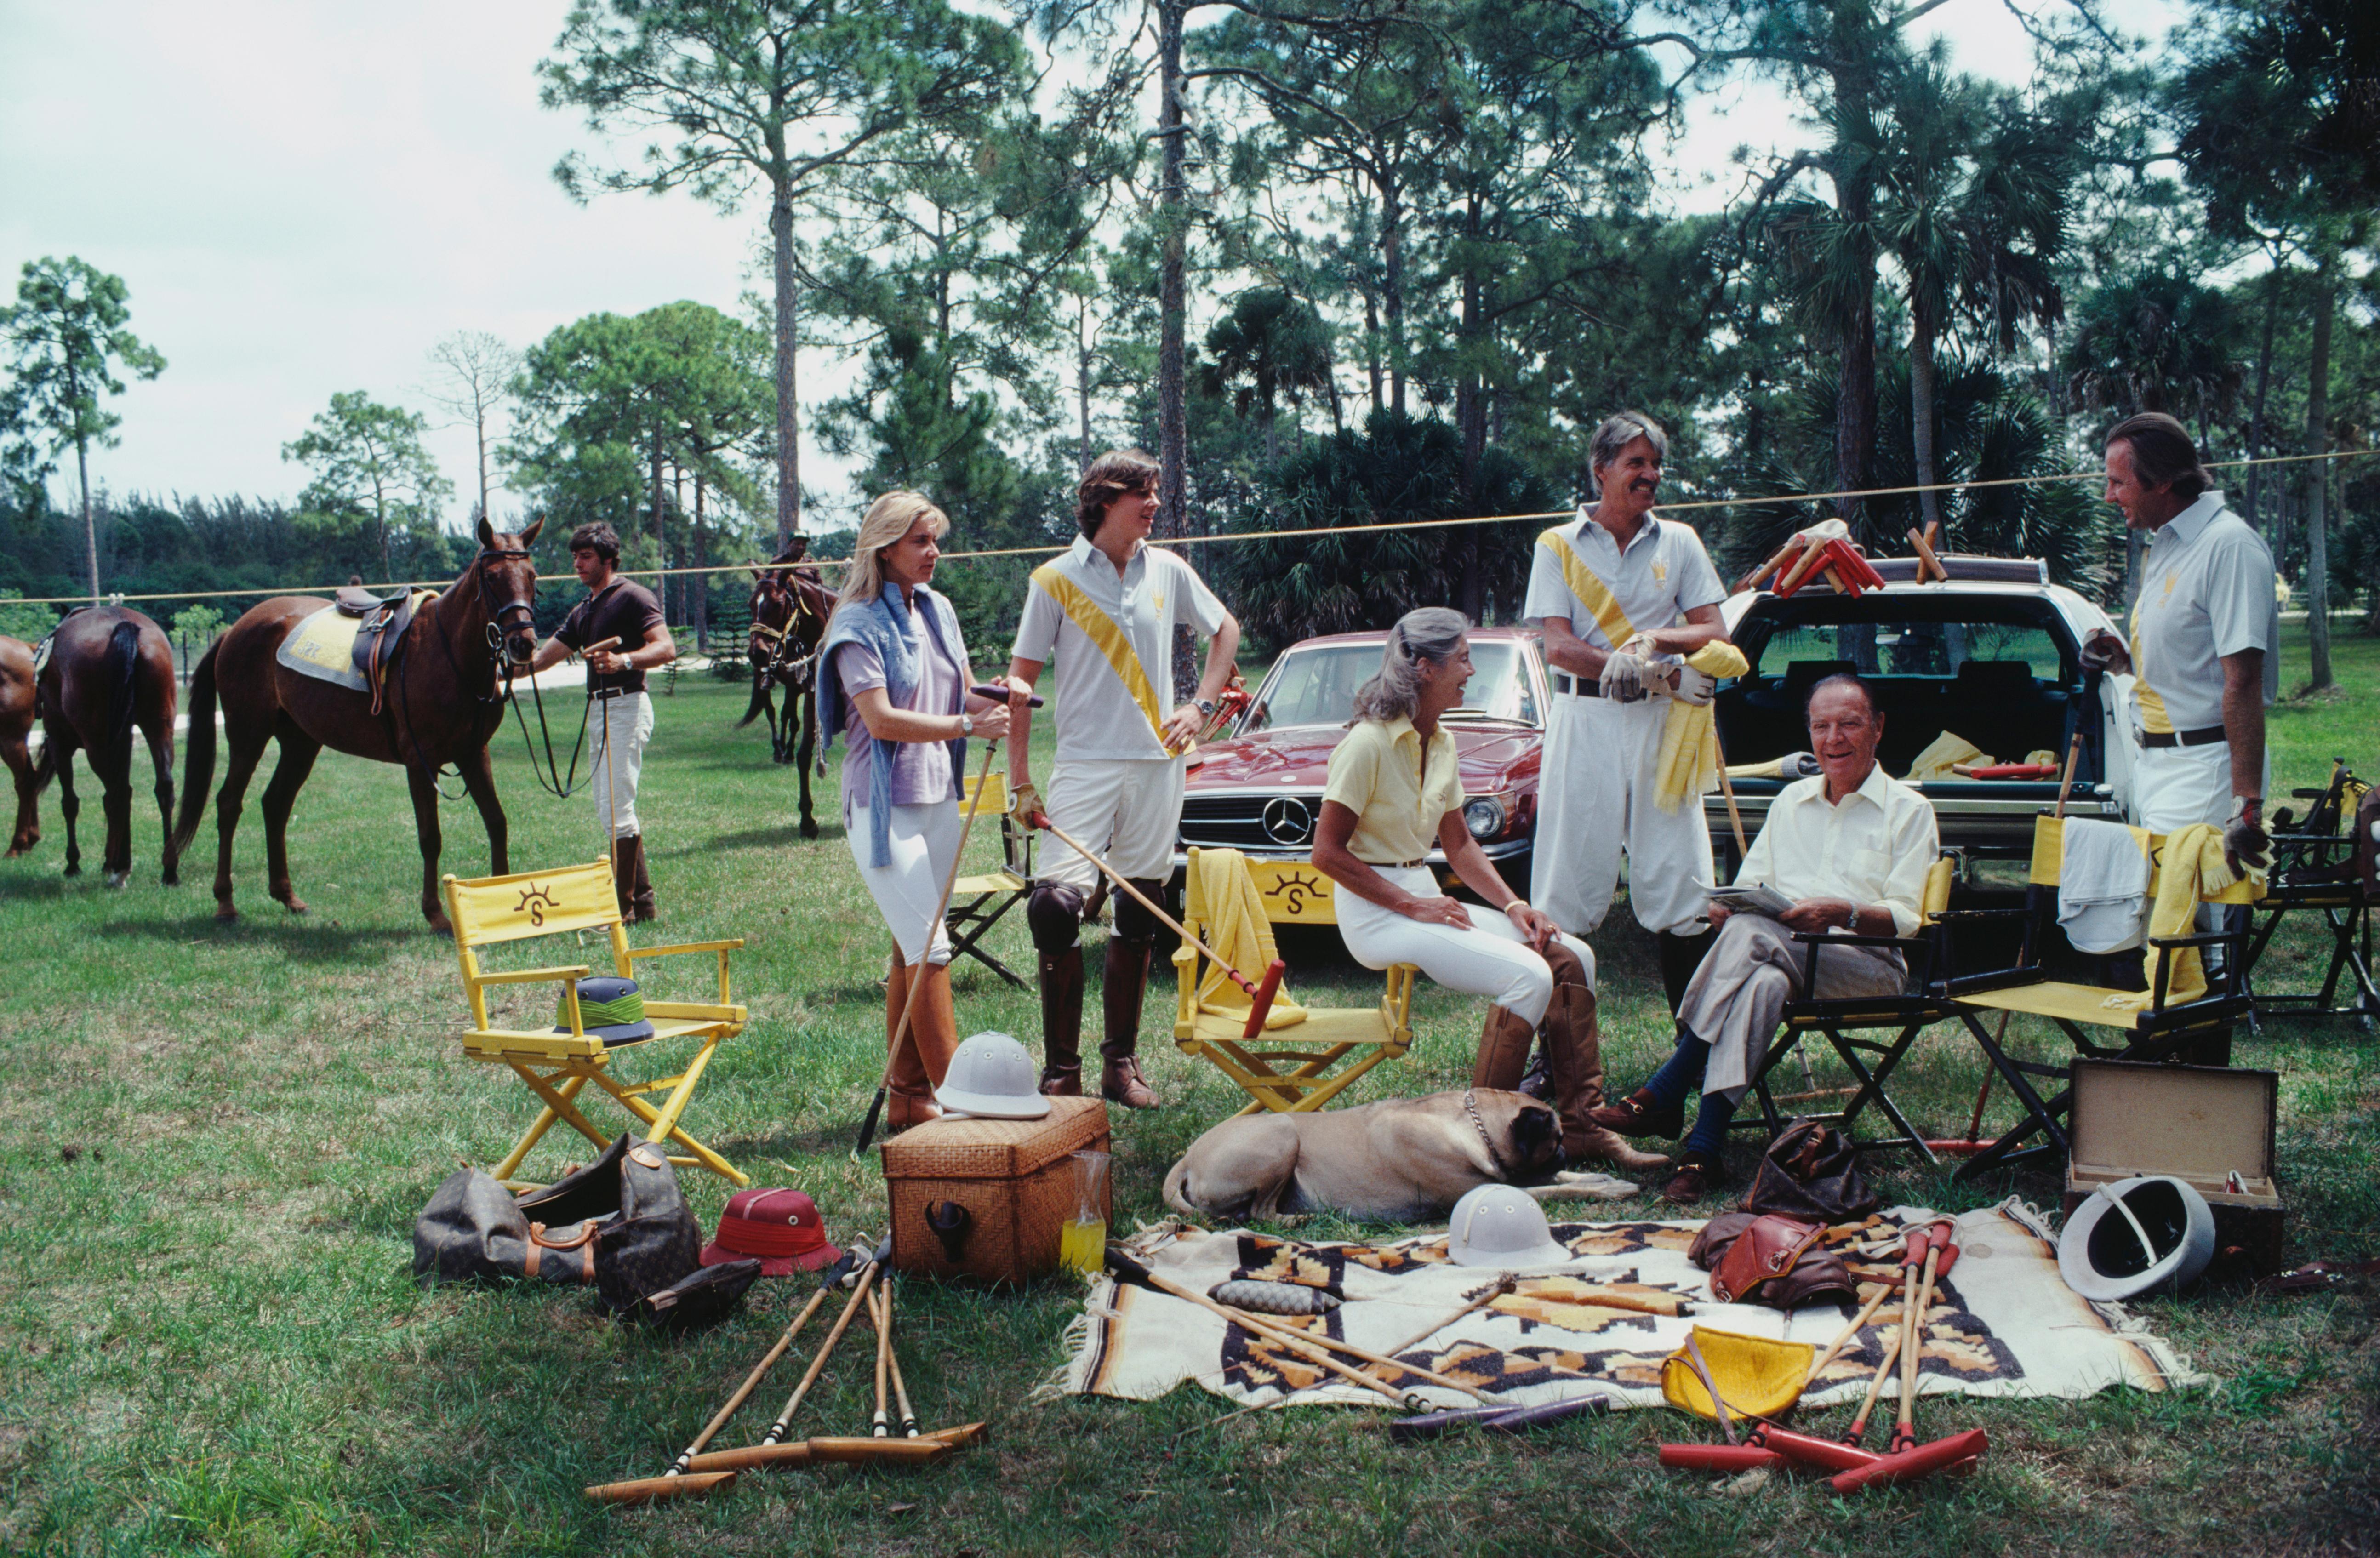 'Polo Party' 1981 Slim Aarons Limited Estate Edition Print 

Paul Butler, patriarch of one of America's foremost polo families, with his son, daughter, grandchildren and son-in-law, Palm Beach, April 1981. Left to right: Adam Butler, Reutie Butler